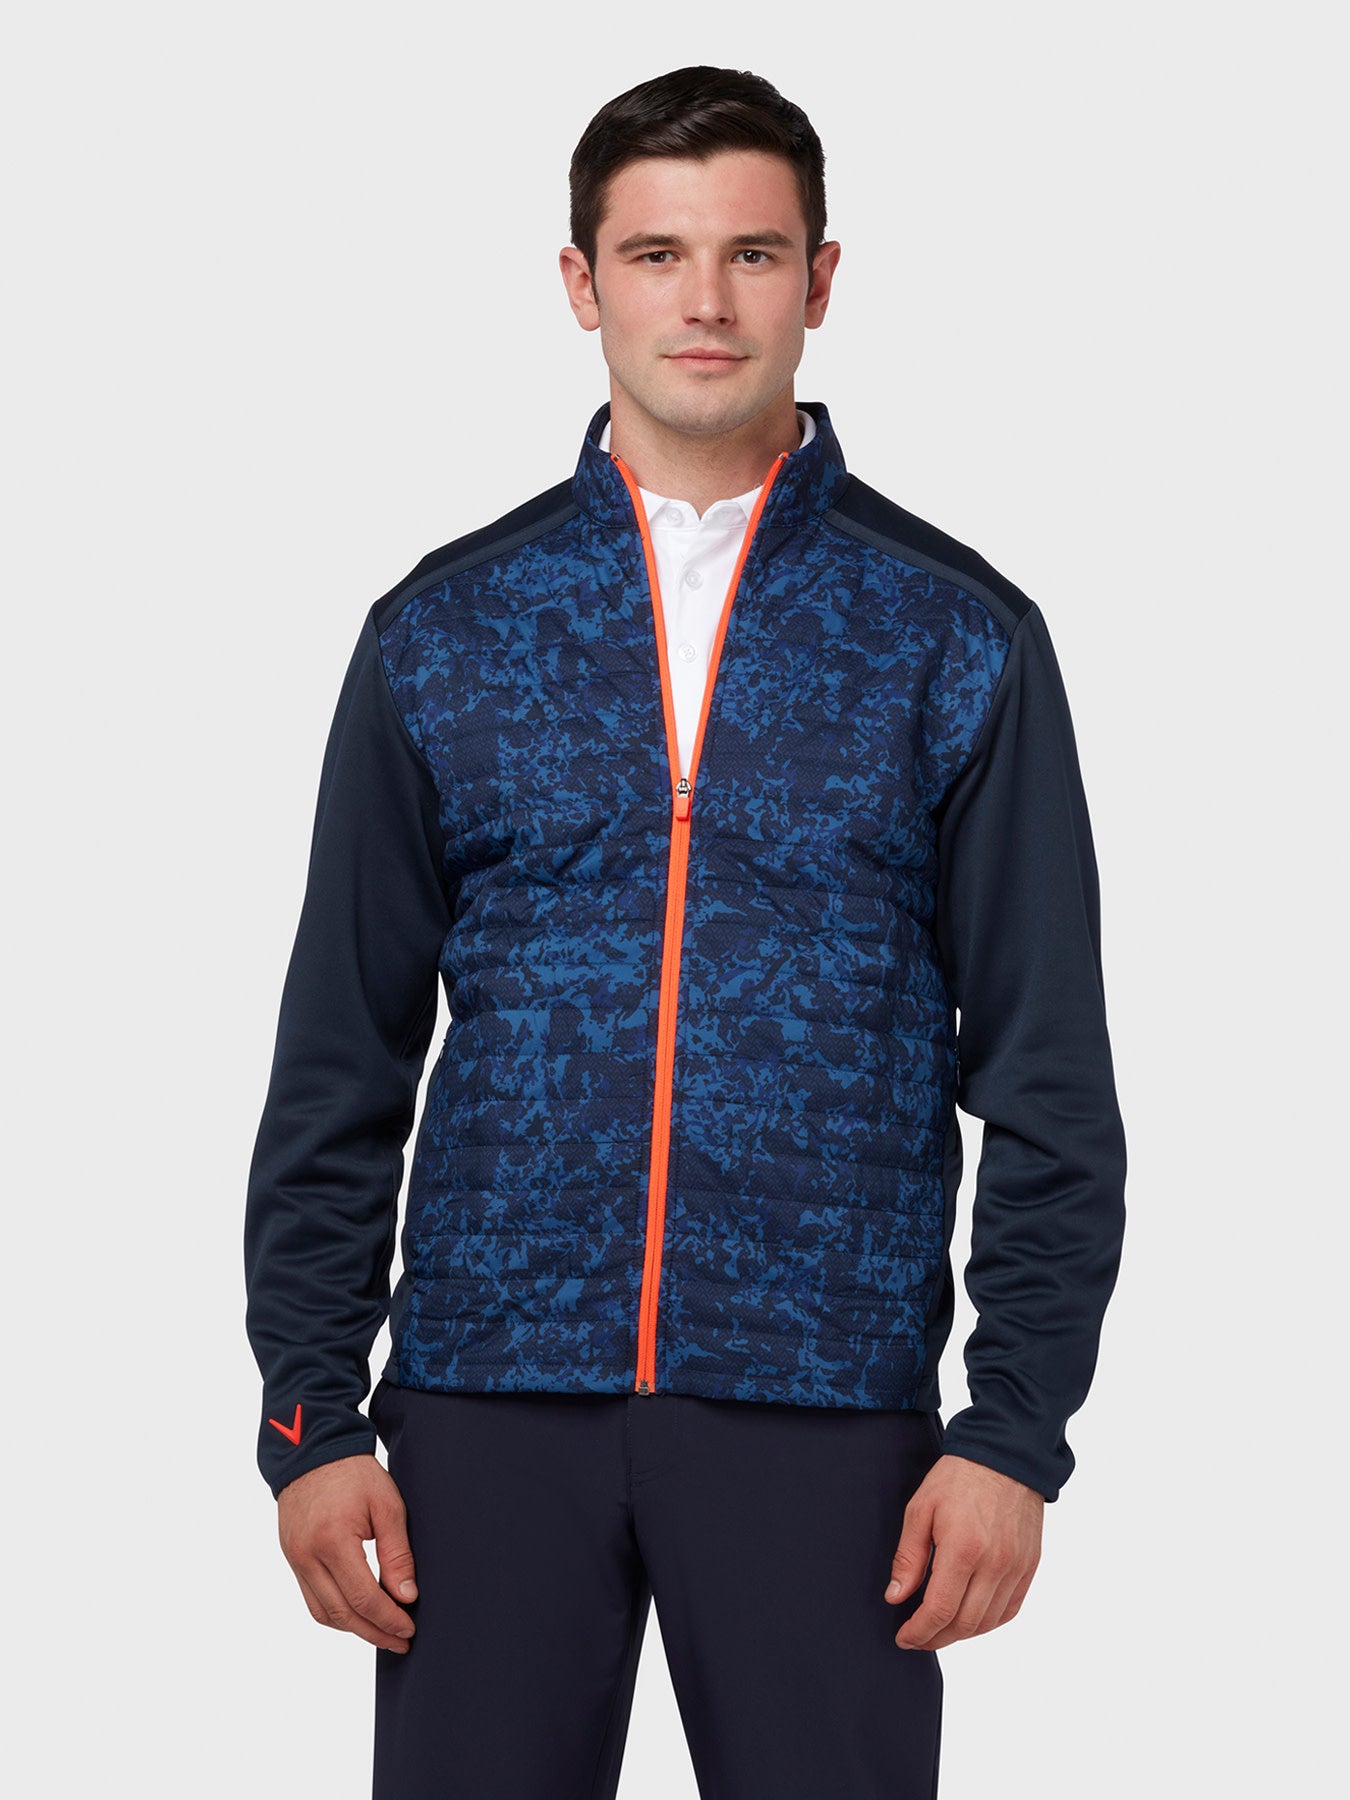 View X Series Abstract Camo Jacket In Navy Blazer information